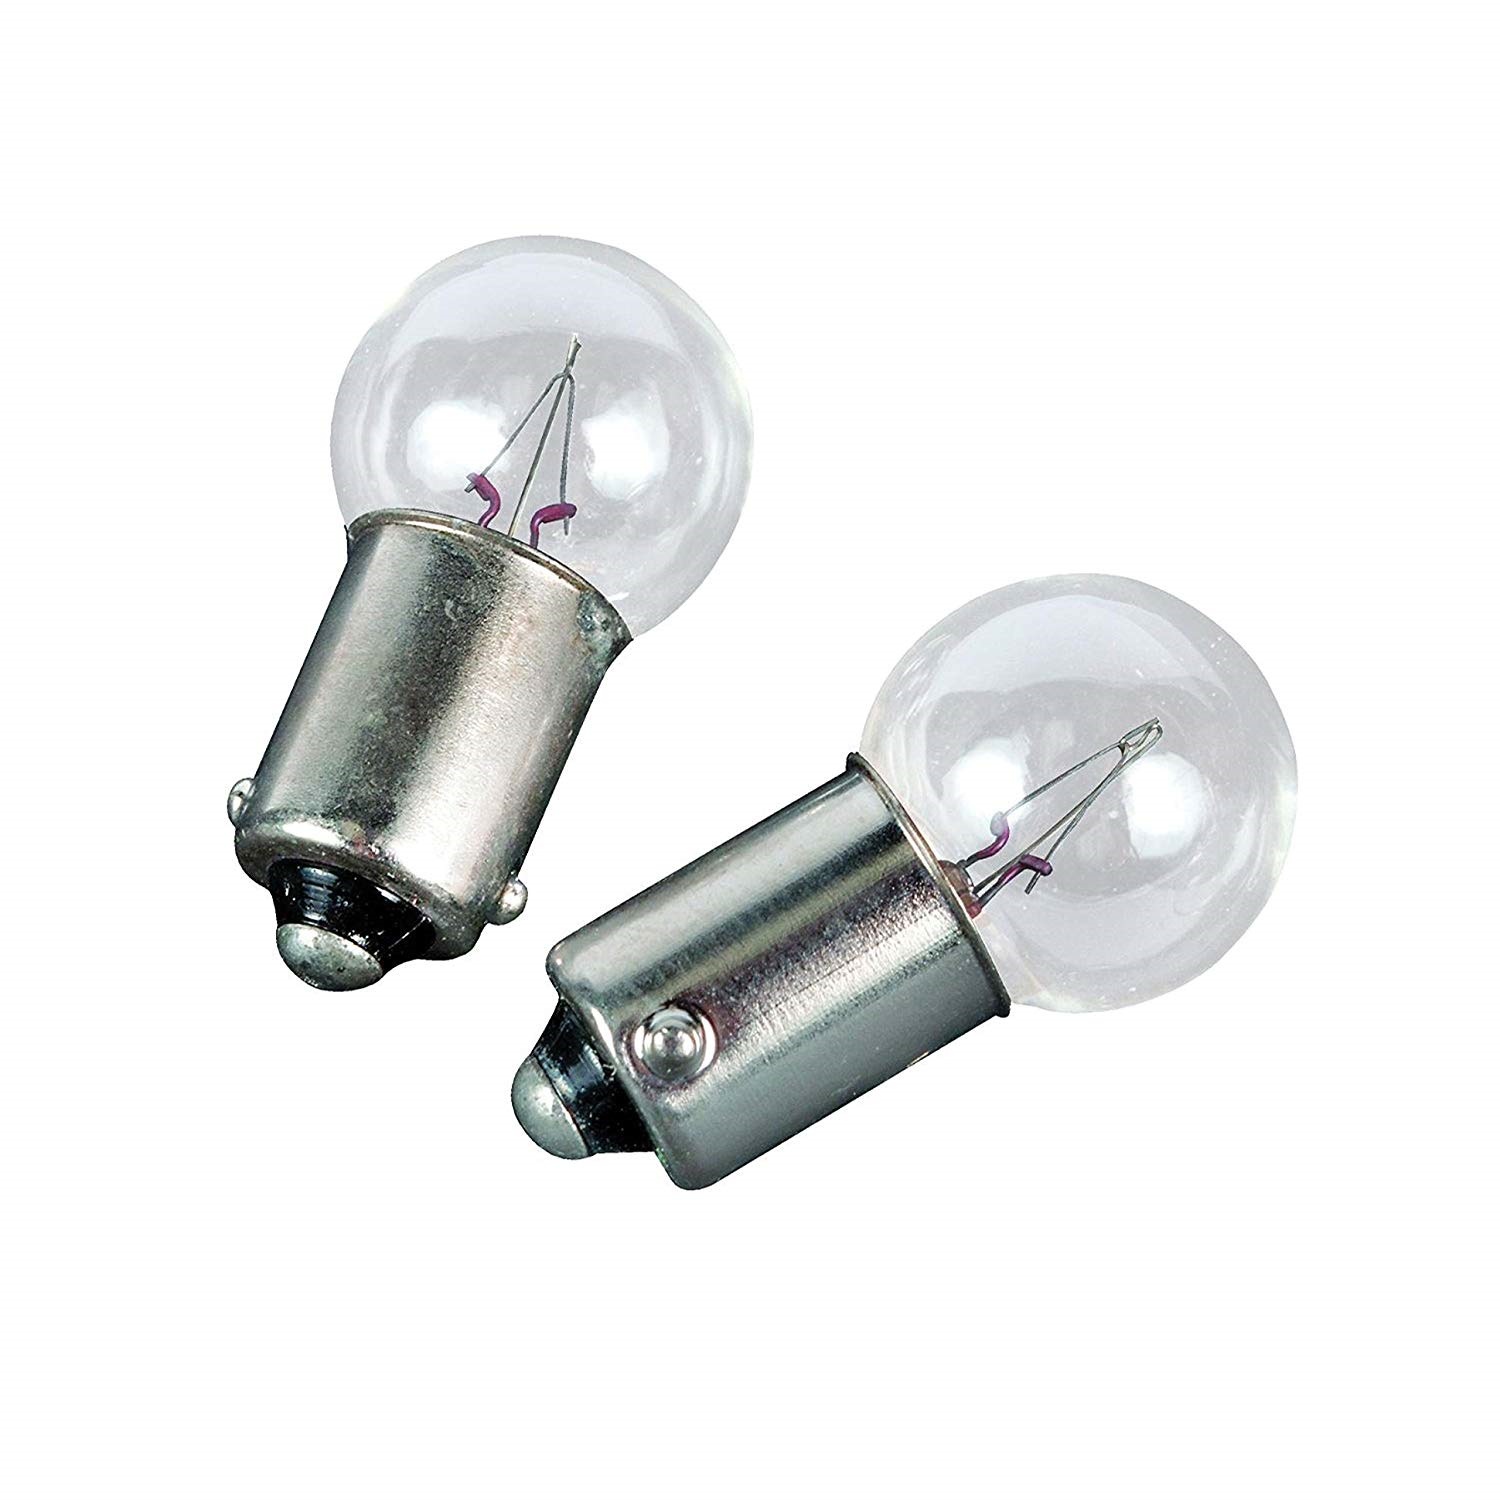 Box of 2 Camco 54715 57 Replacement Auto Instrument Light Bulb